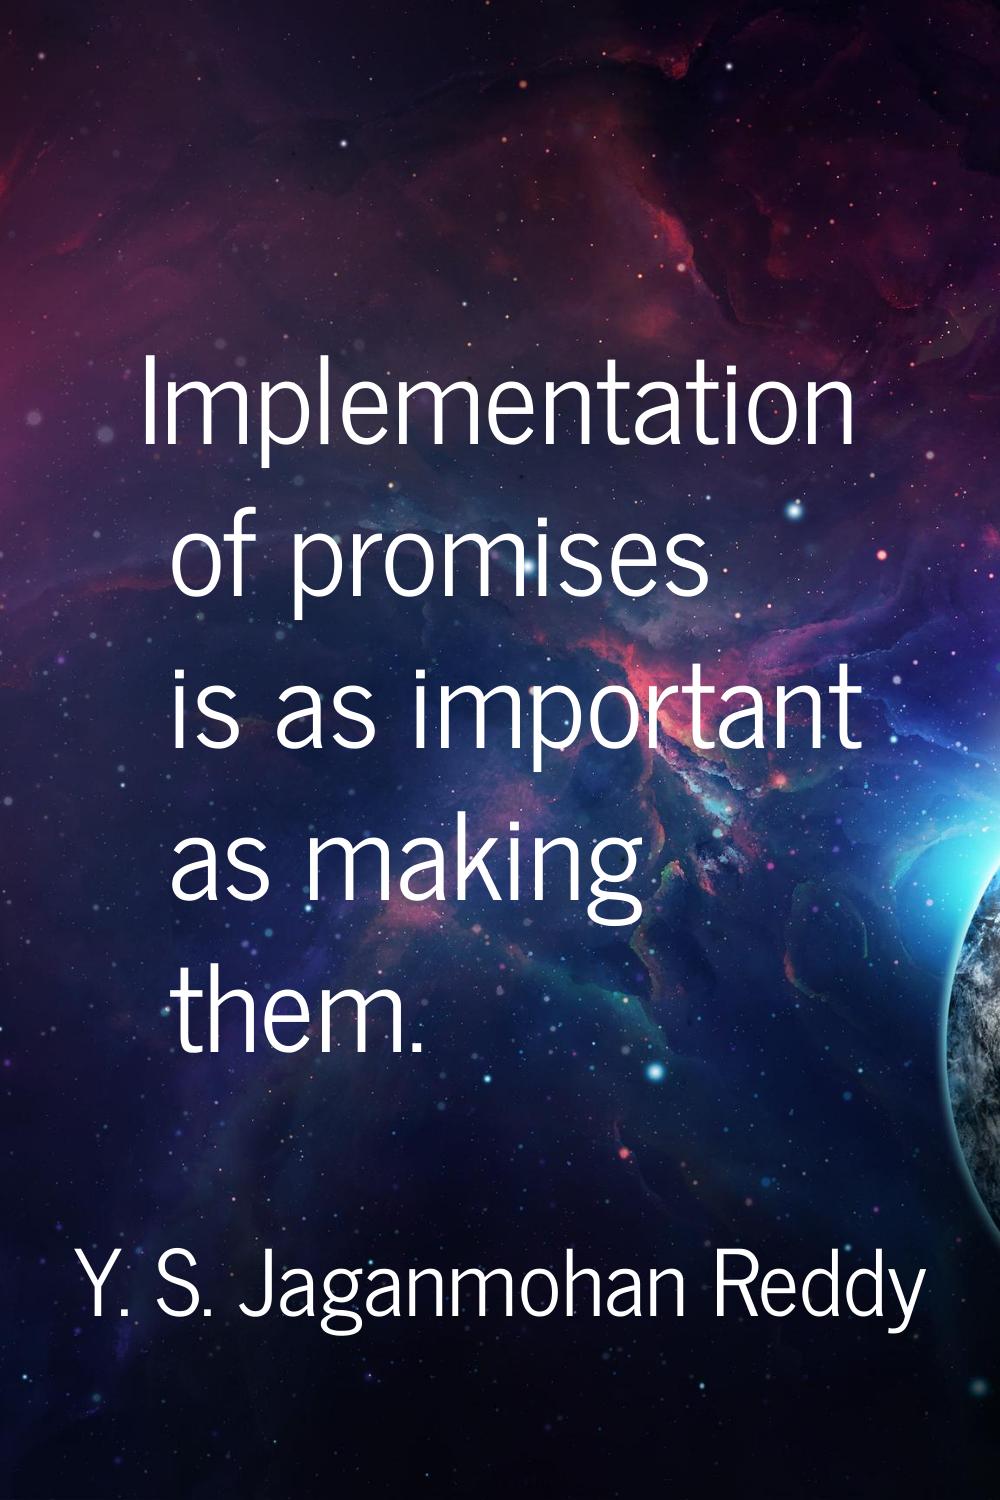 Implementation of promises is as important as making them.